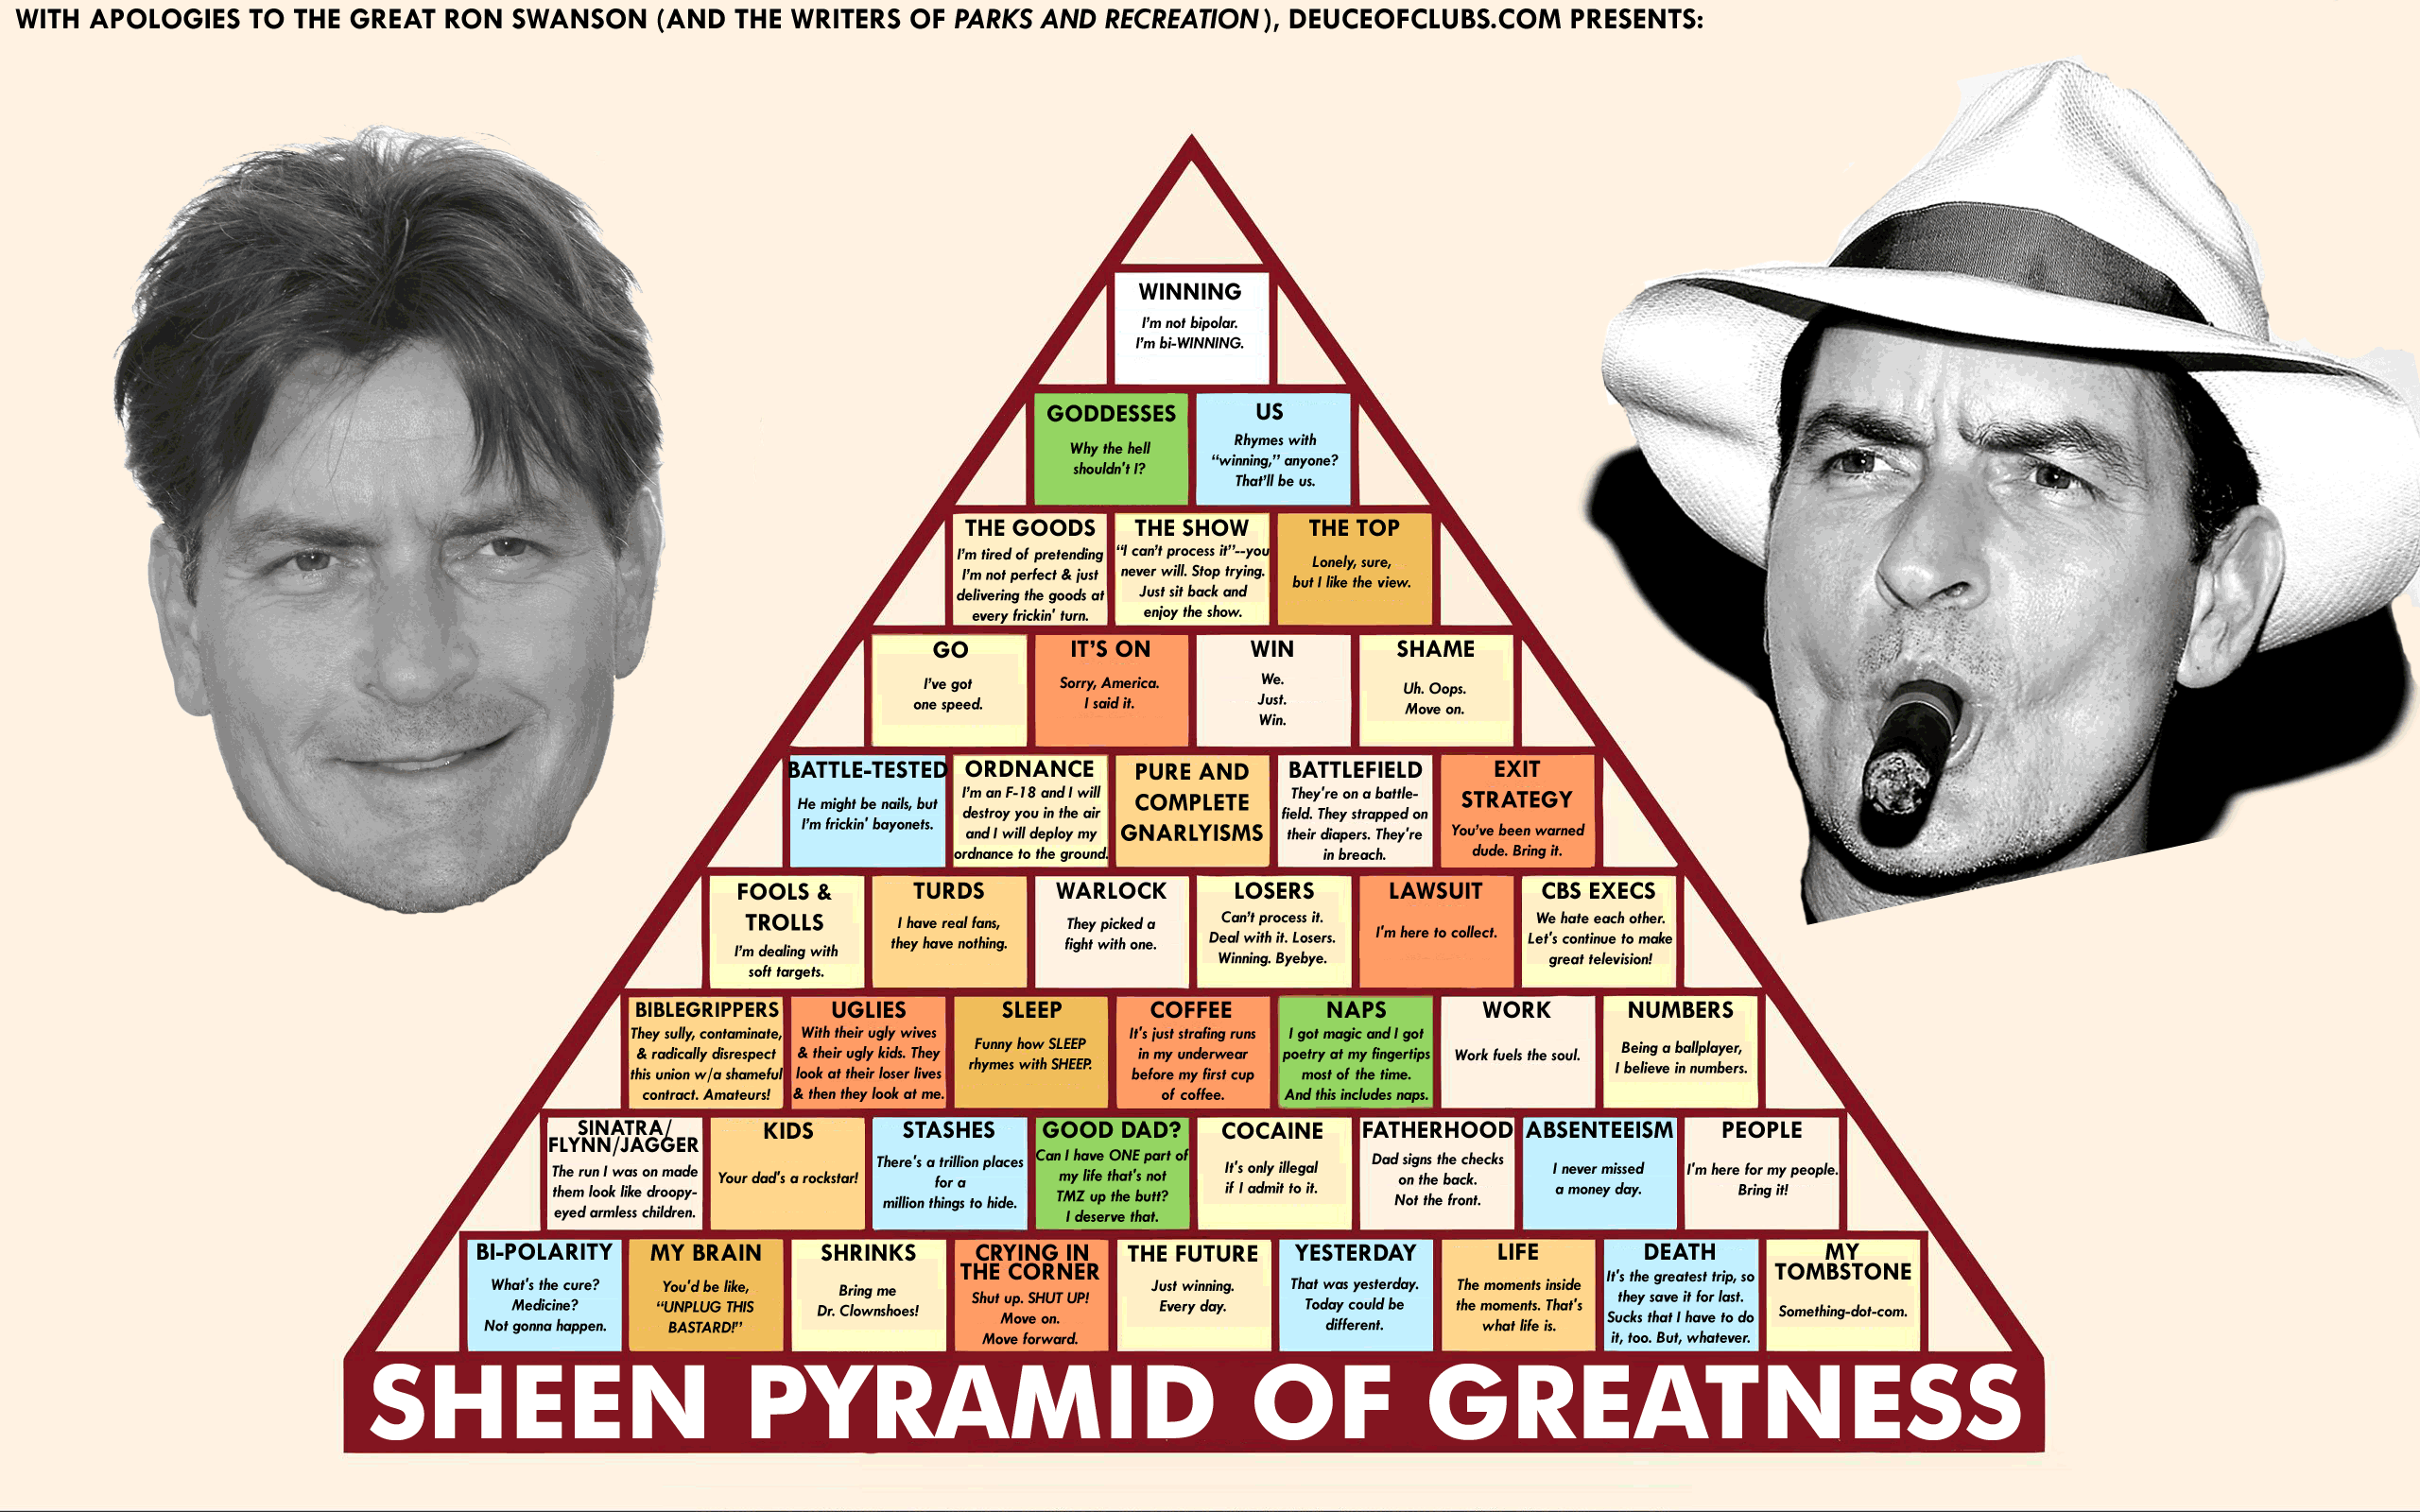 Charlie Sheen Pyramid of Greatness